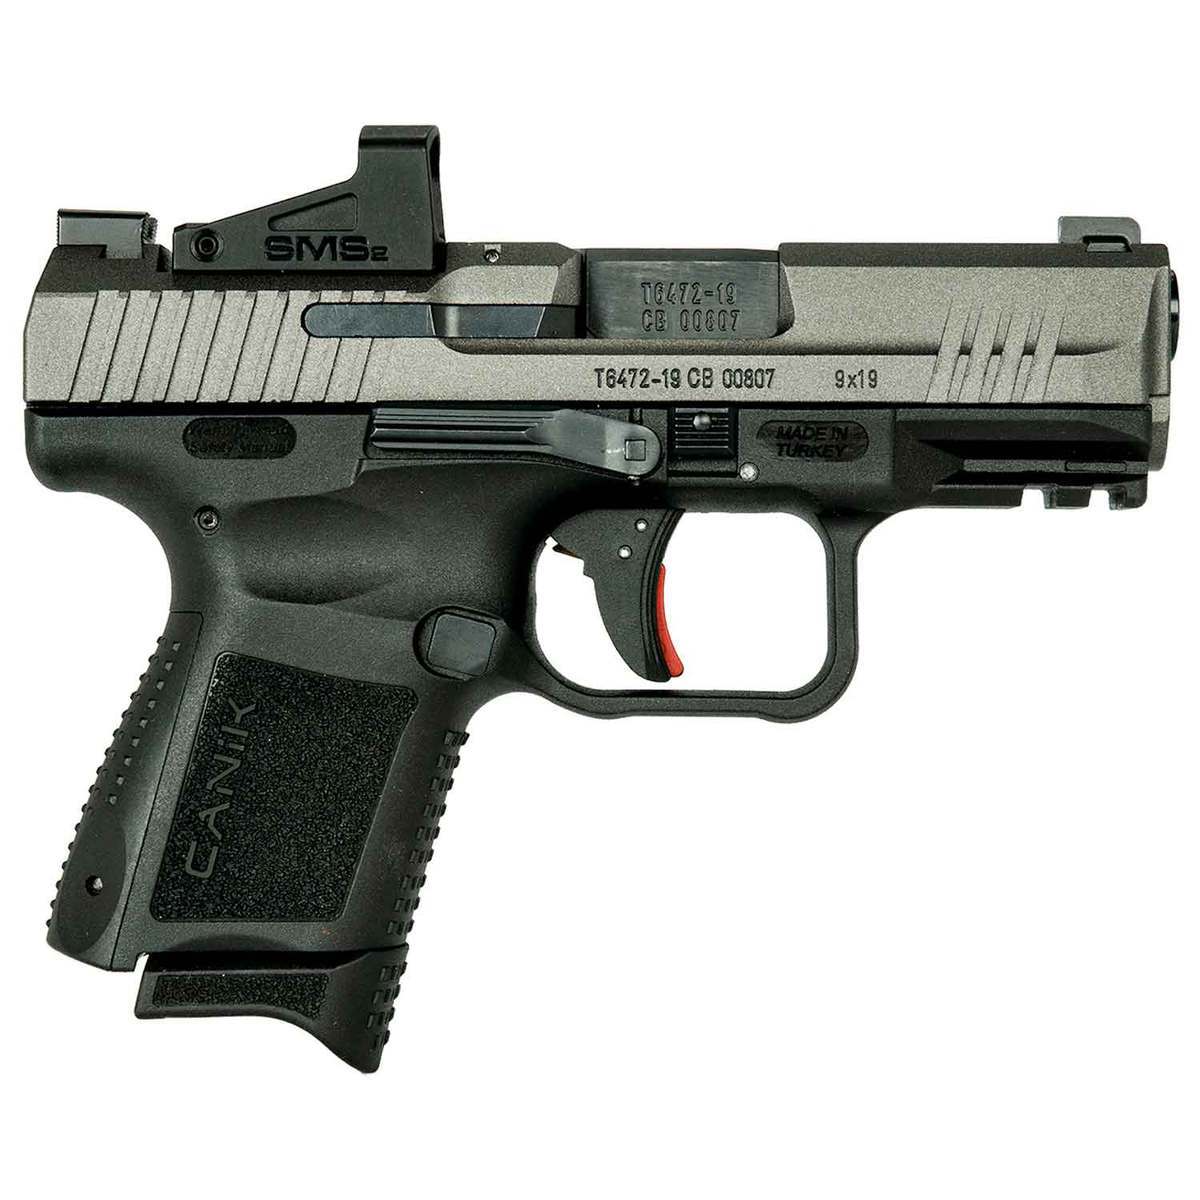 Ruger LCP MAX 380 Auto (ACP) 2.8in Sapphire PVD Pistol - 10+1 Rounds